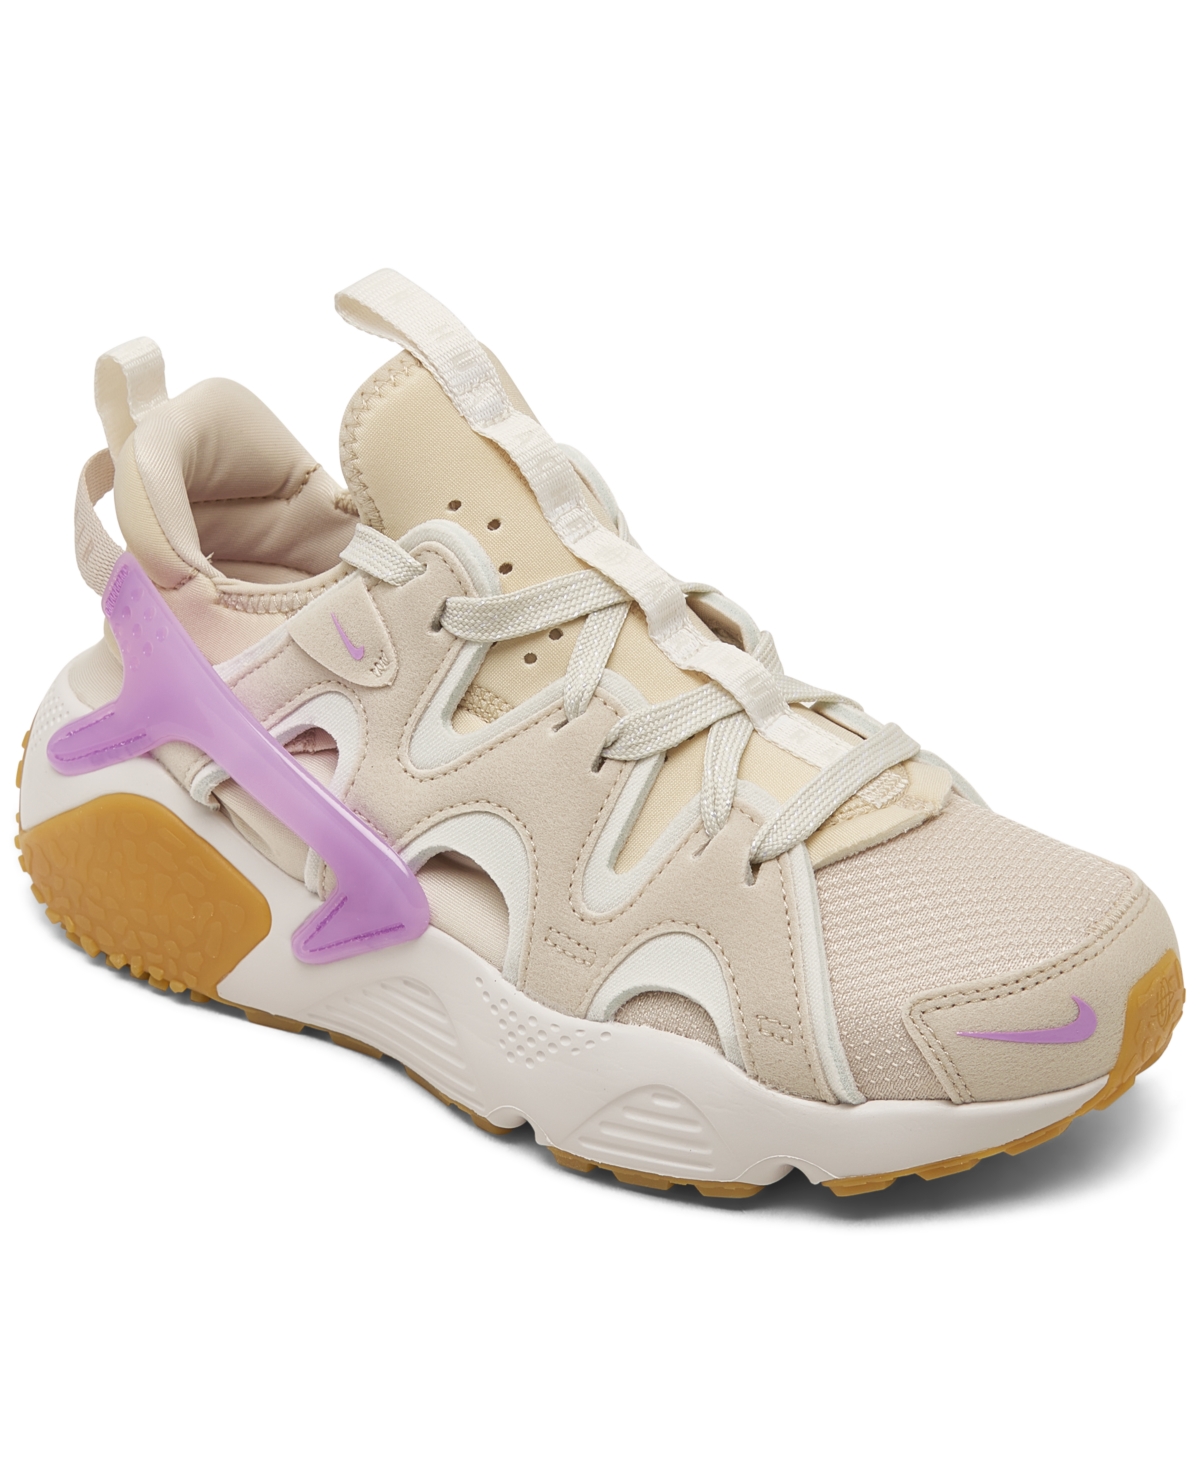 NIKE WOMEN'S AIR HUARACHE CRAFT CASUAL SNEAKERS FROM FINISH LINE